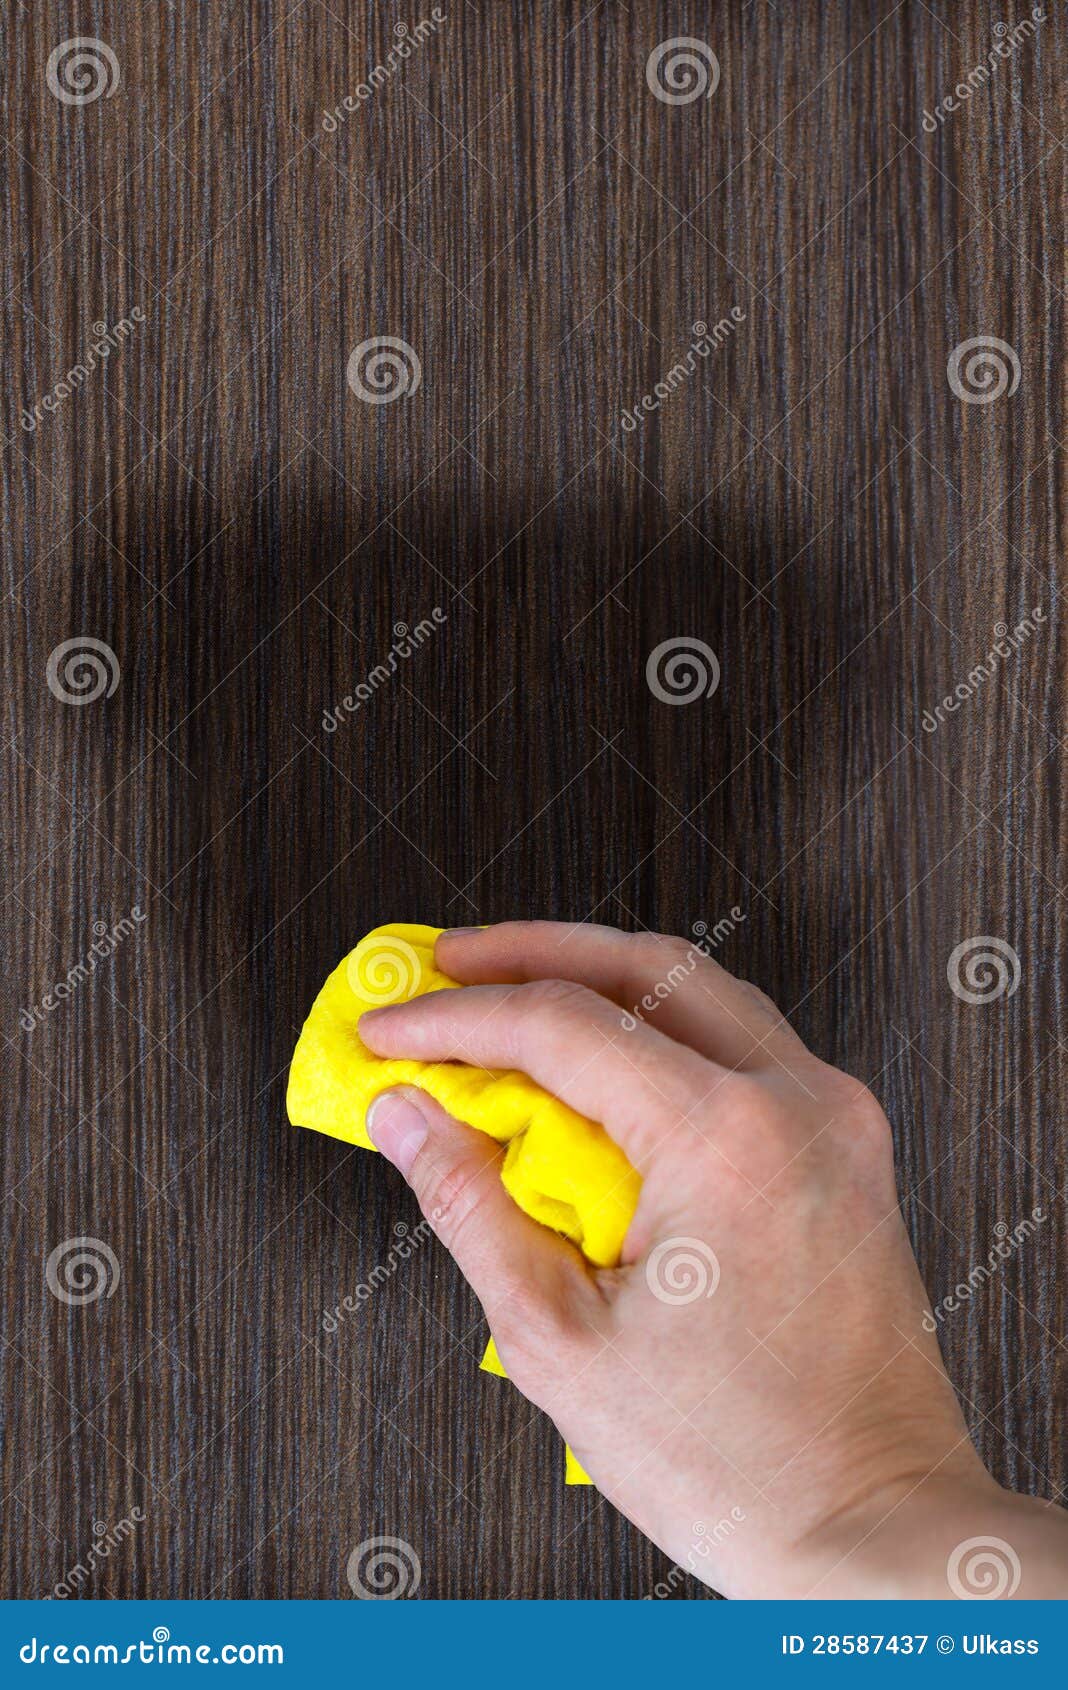 Hand With A Rag To Dust The Wood Furniture Stock Image Image Of